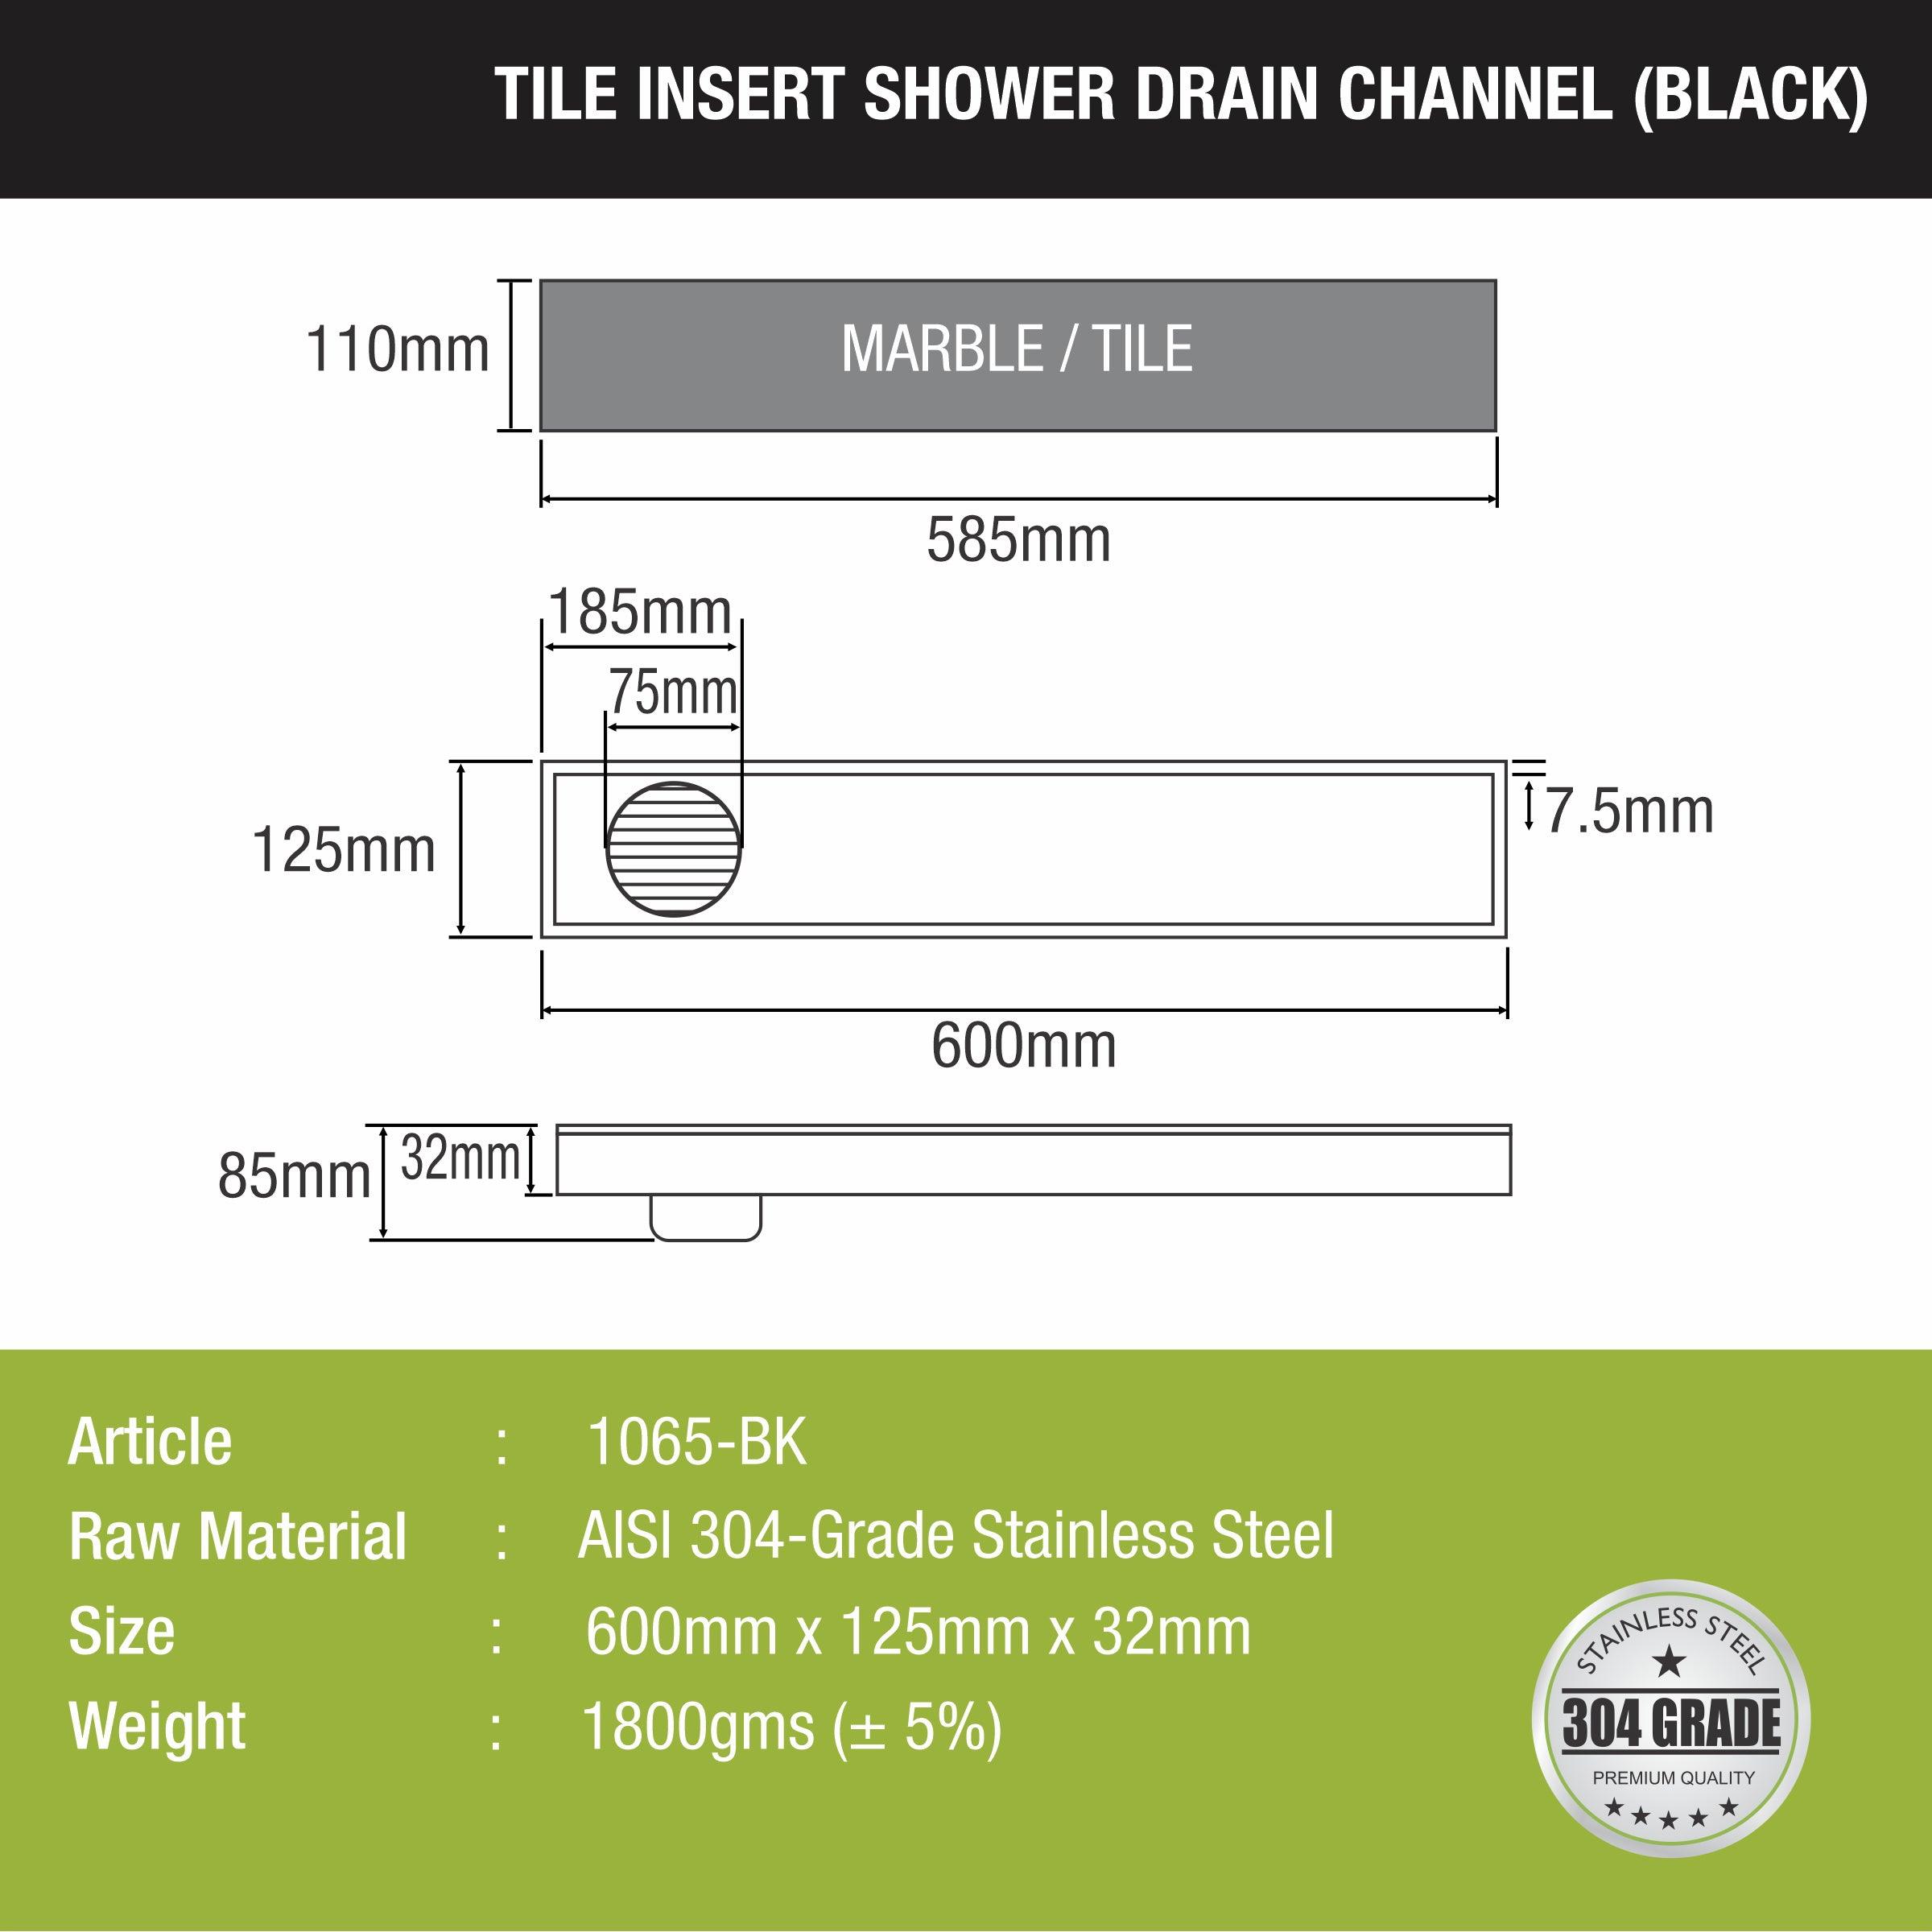 Tile Insert Shower Drain Channel - Black (24 x 5 Inches) size and measurement